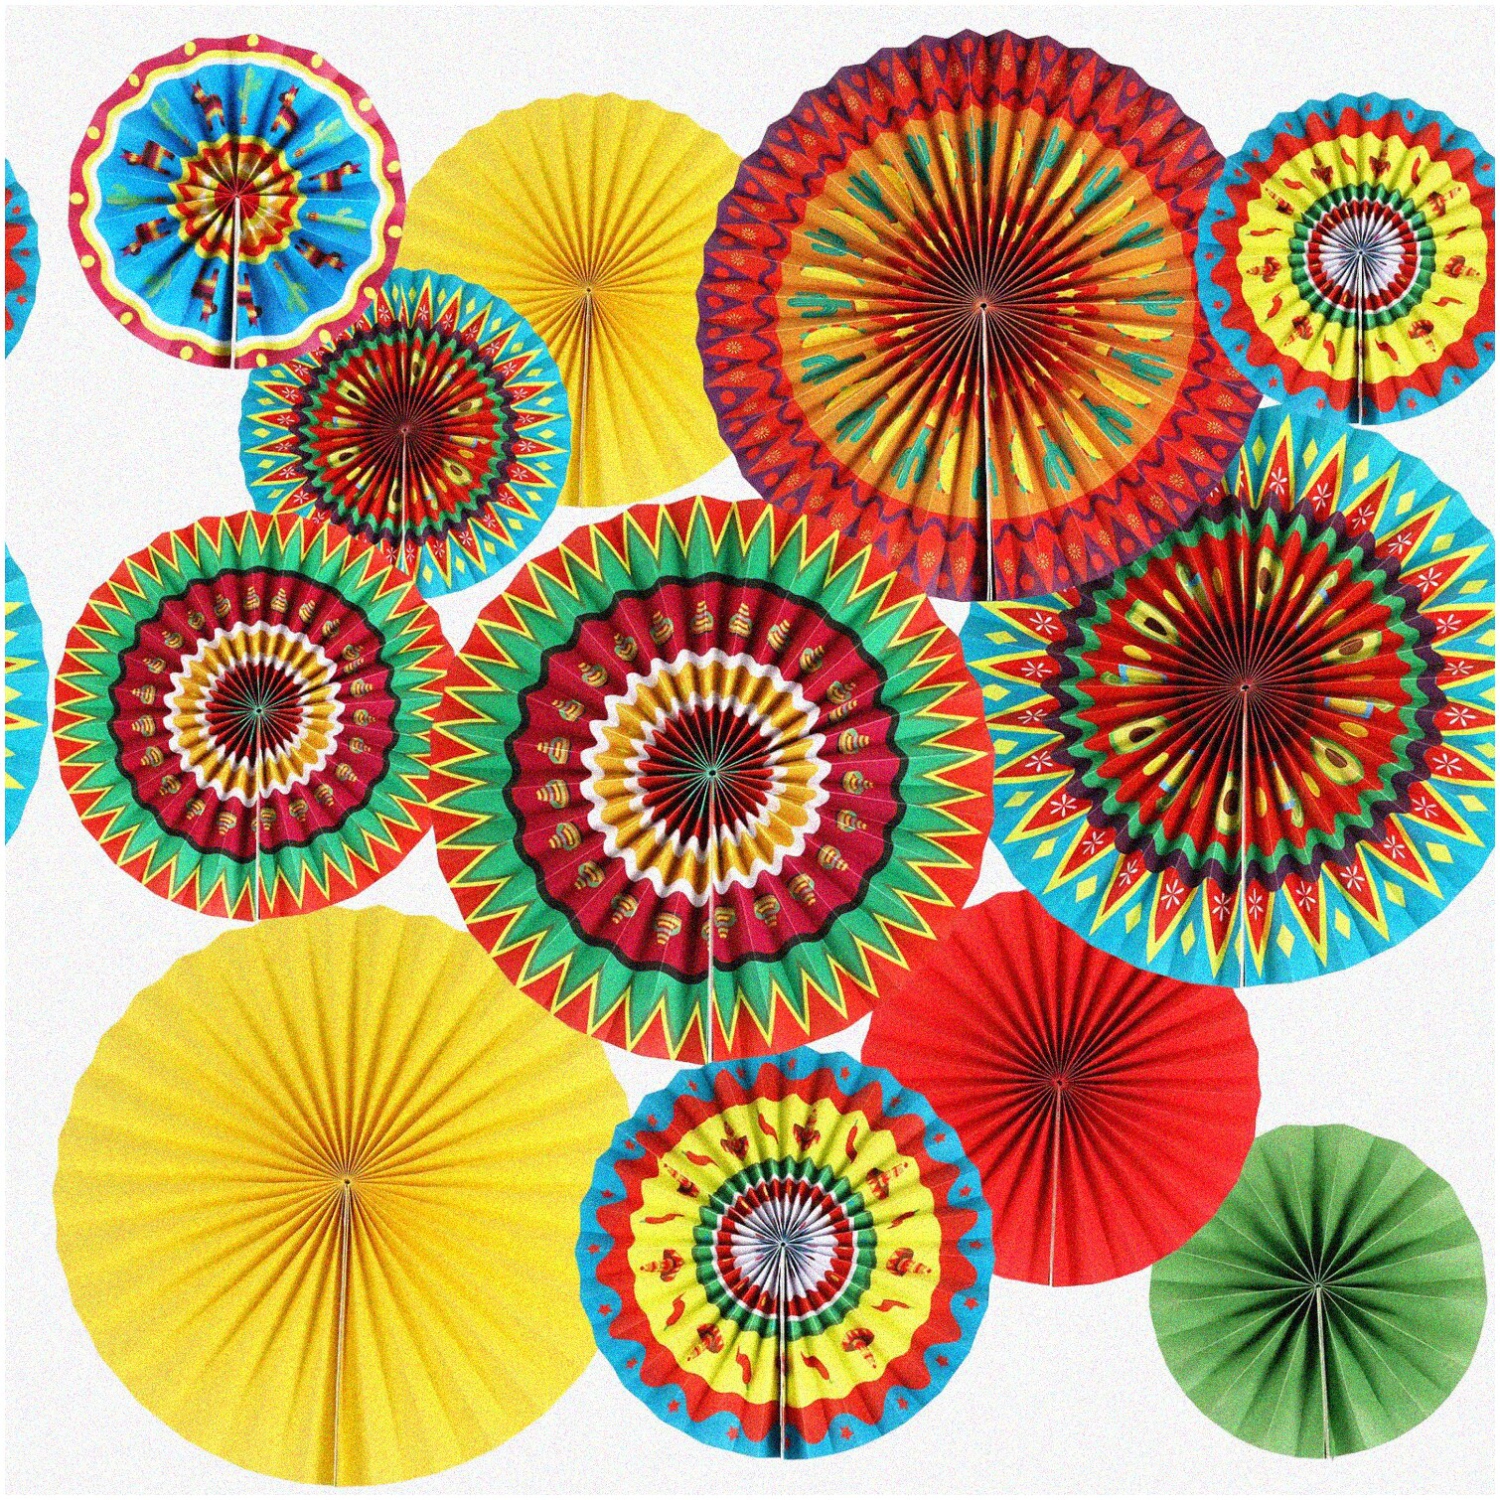 Southwestern Swirls: 12 Mexican Hanging Paper Fans for Cinco de Mayo, Taco Tuesday, Luau Events - Fiesta Party Supplies & Photo Props